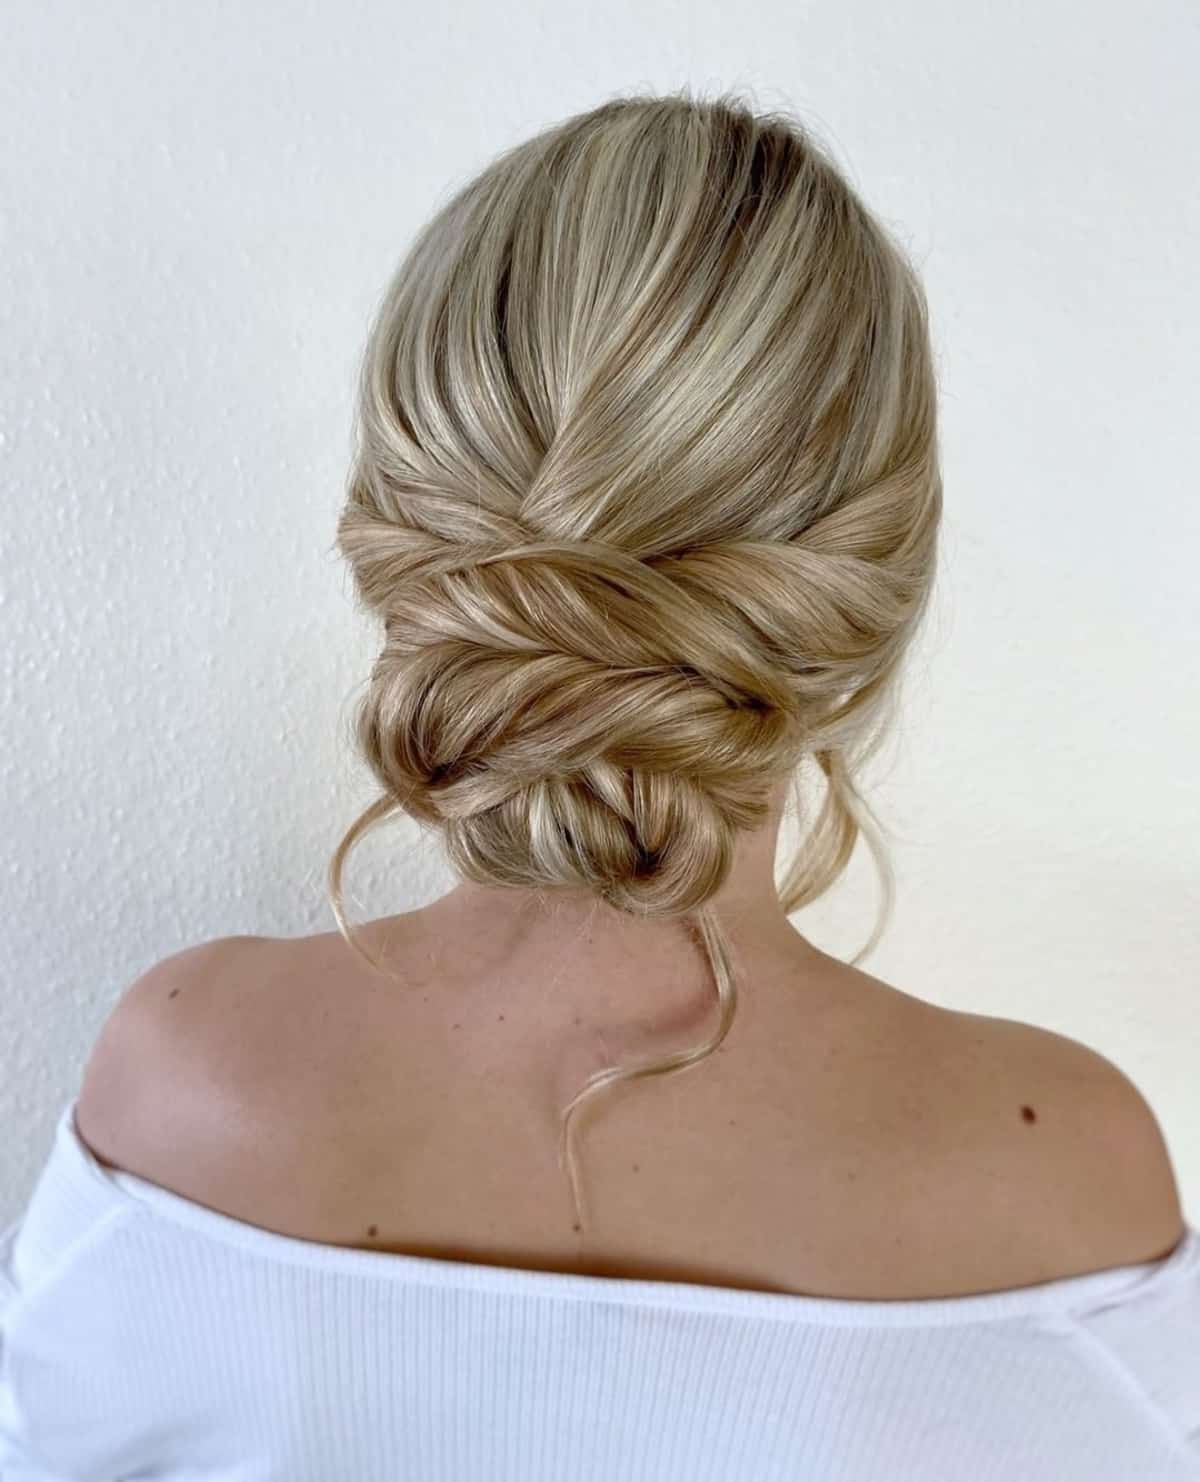 35 Gorgeous Bridesmaid Hairstyles For The Brides Big Day Regarding Most Popular Bridesmaid’s Updo For Long Hair (Gallery 14 of 15)